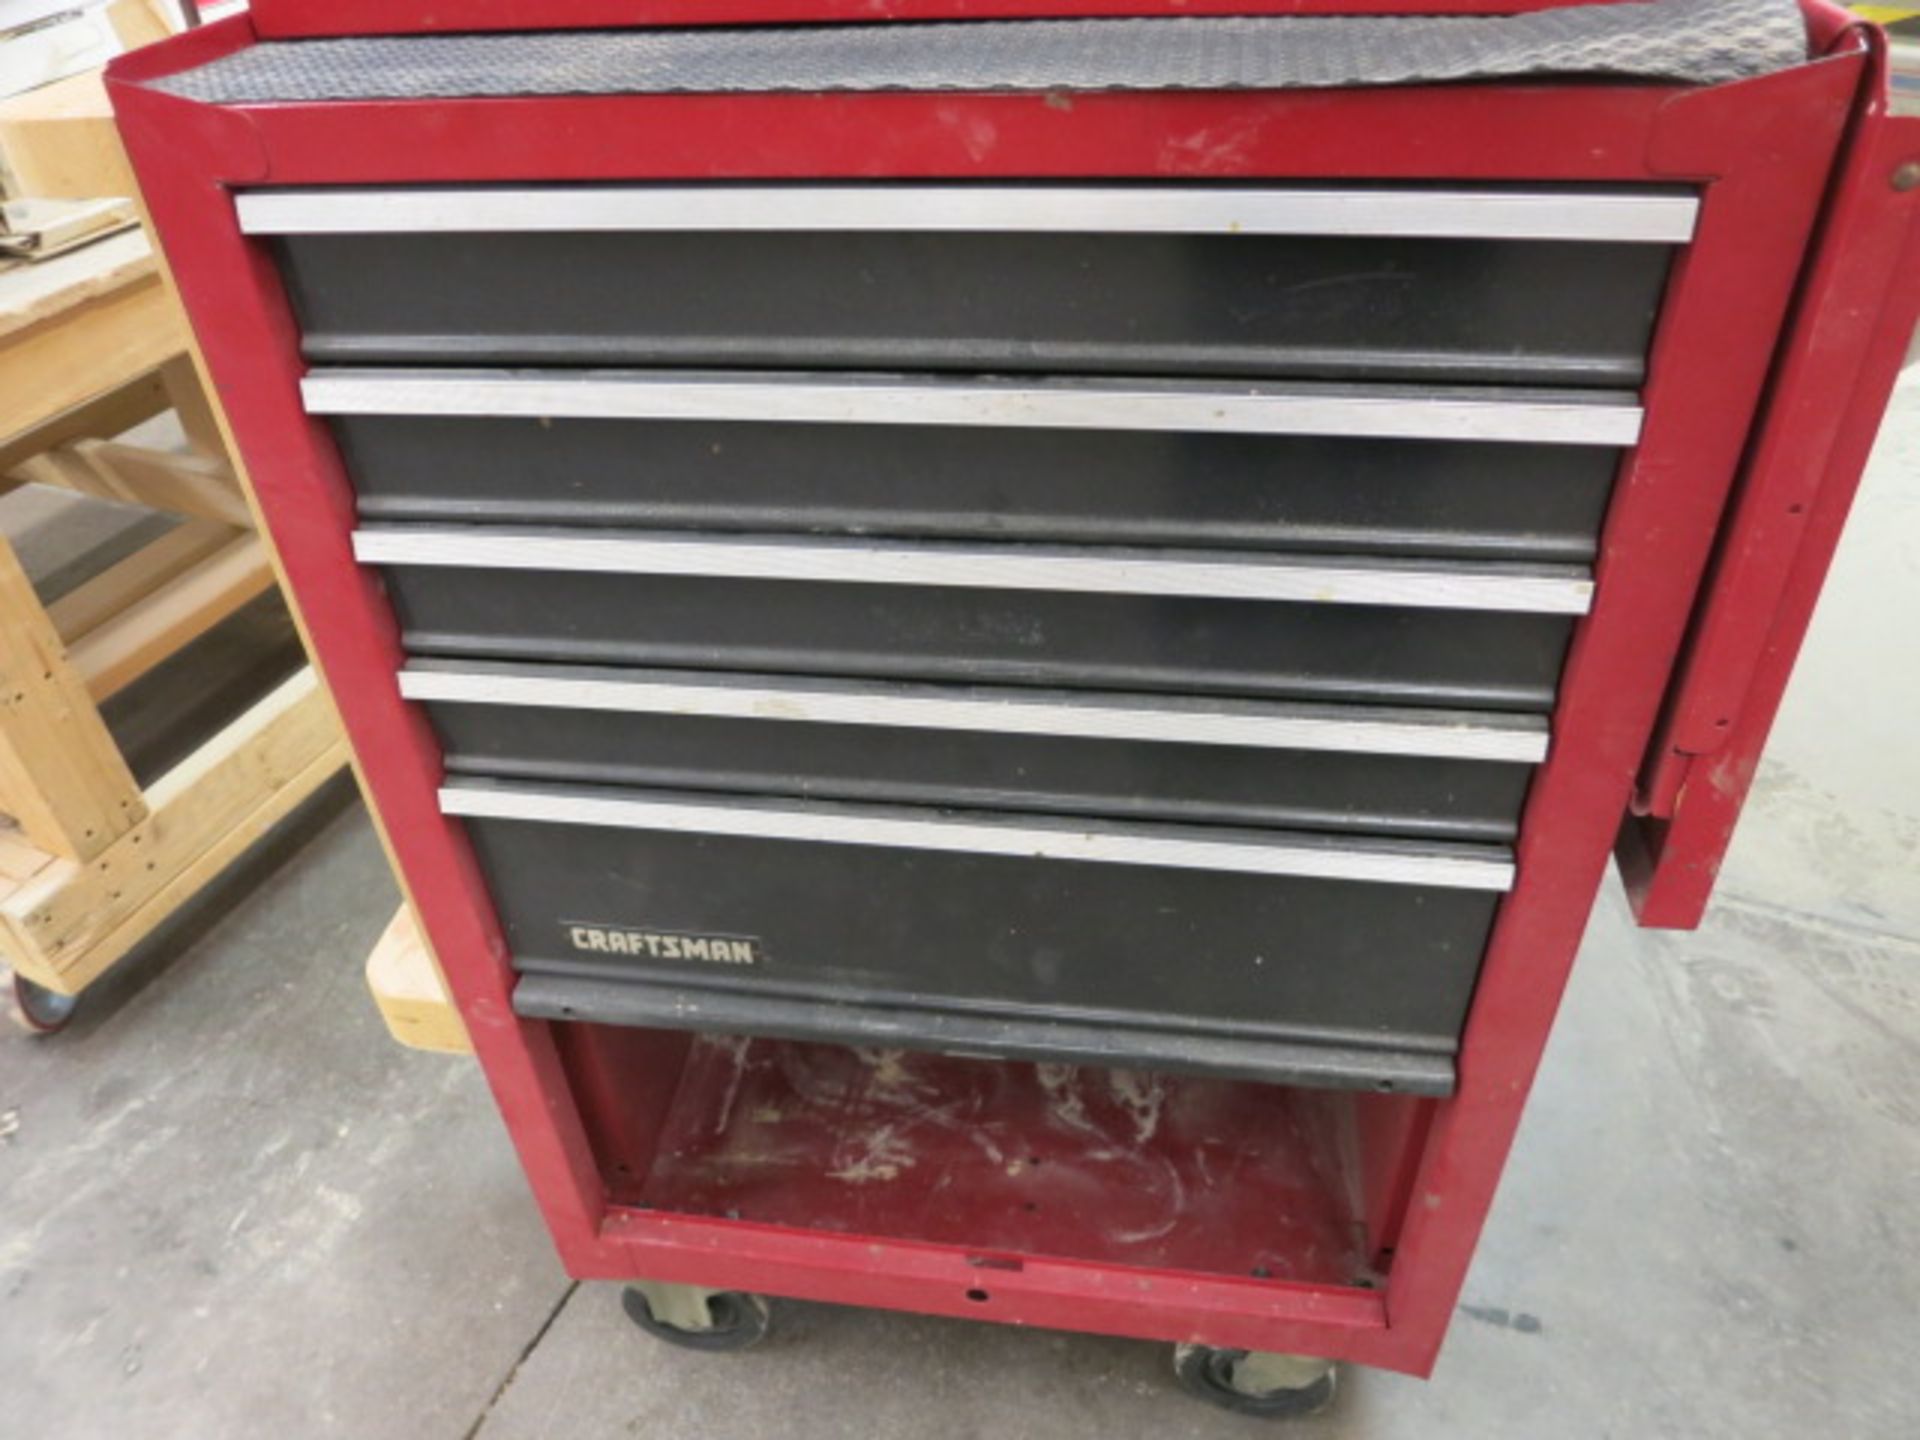 Craftsman Tool Cabinet with Contents - removal available October 26, 2018 - Bild 3 aus 4